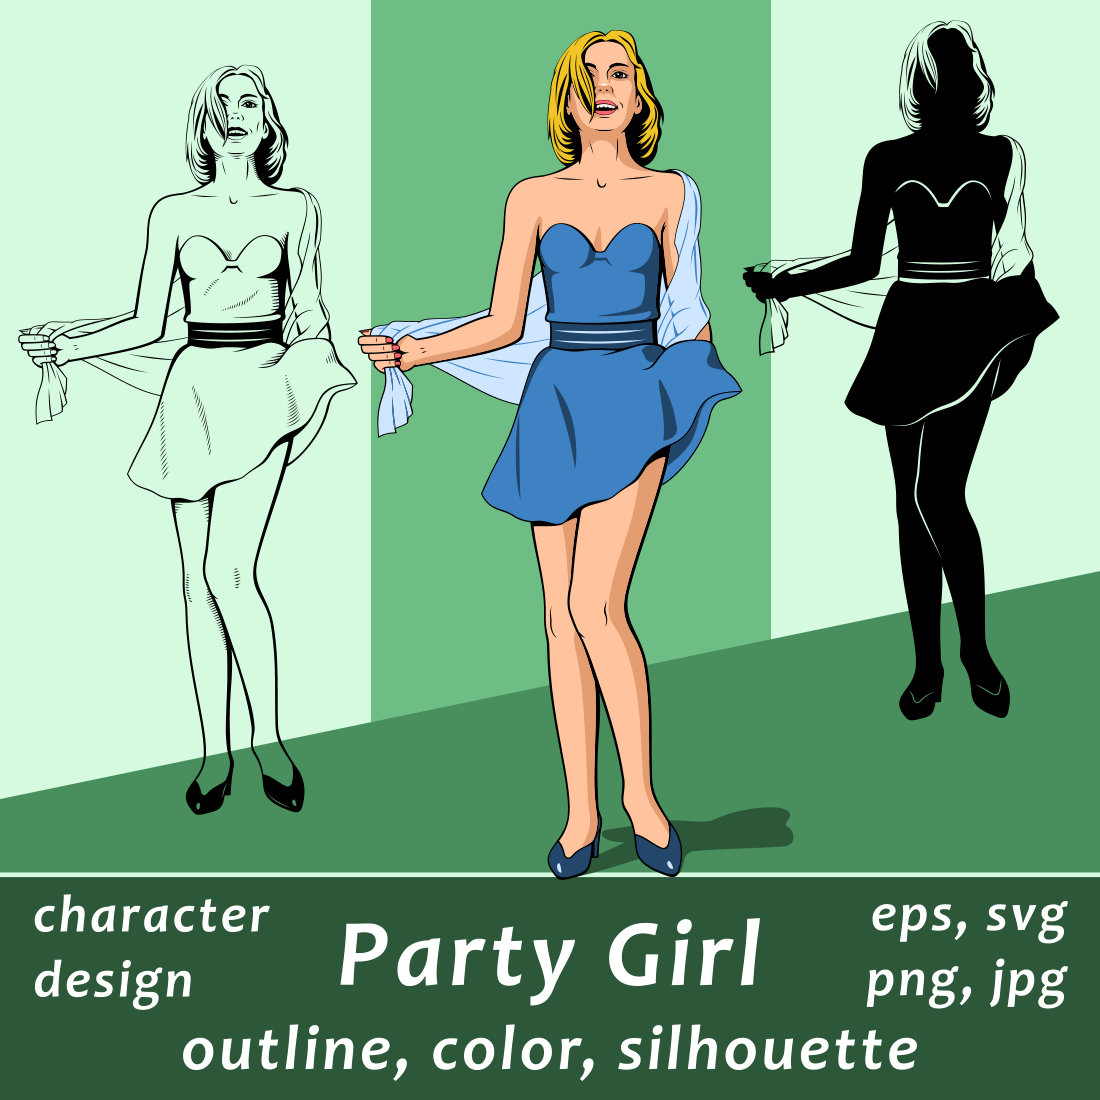 Party Girl Character Design cover image.